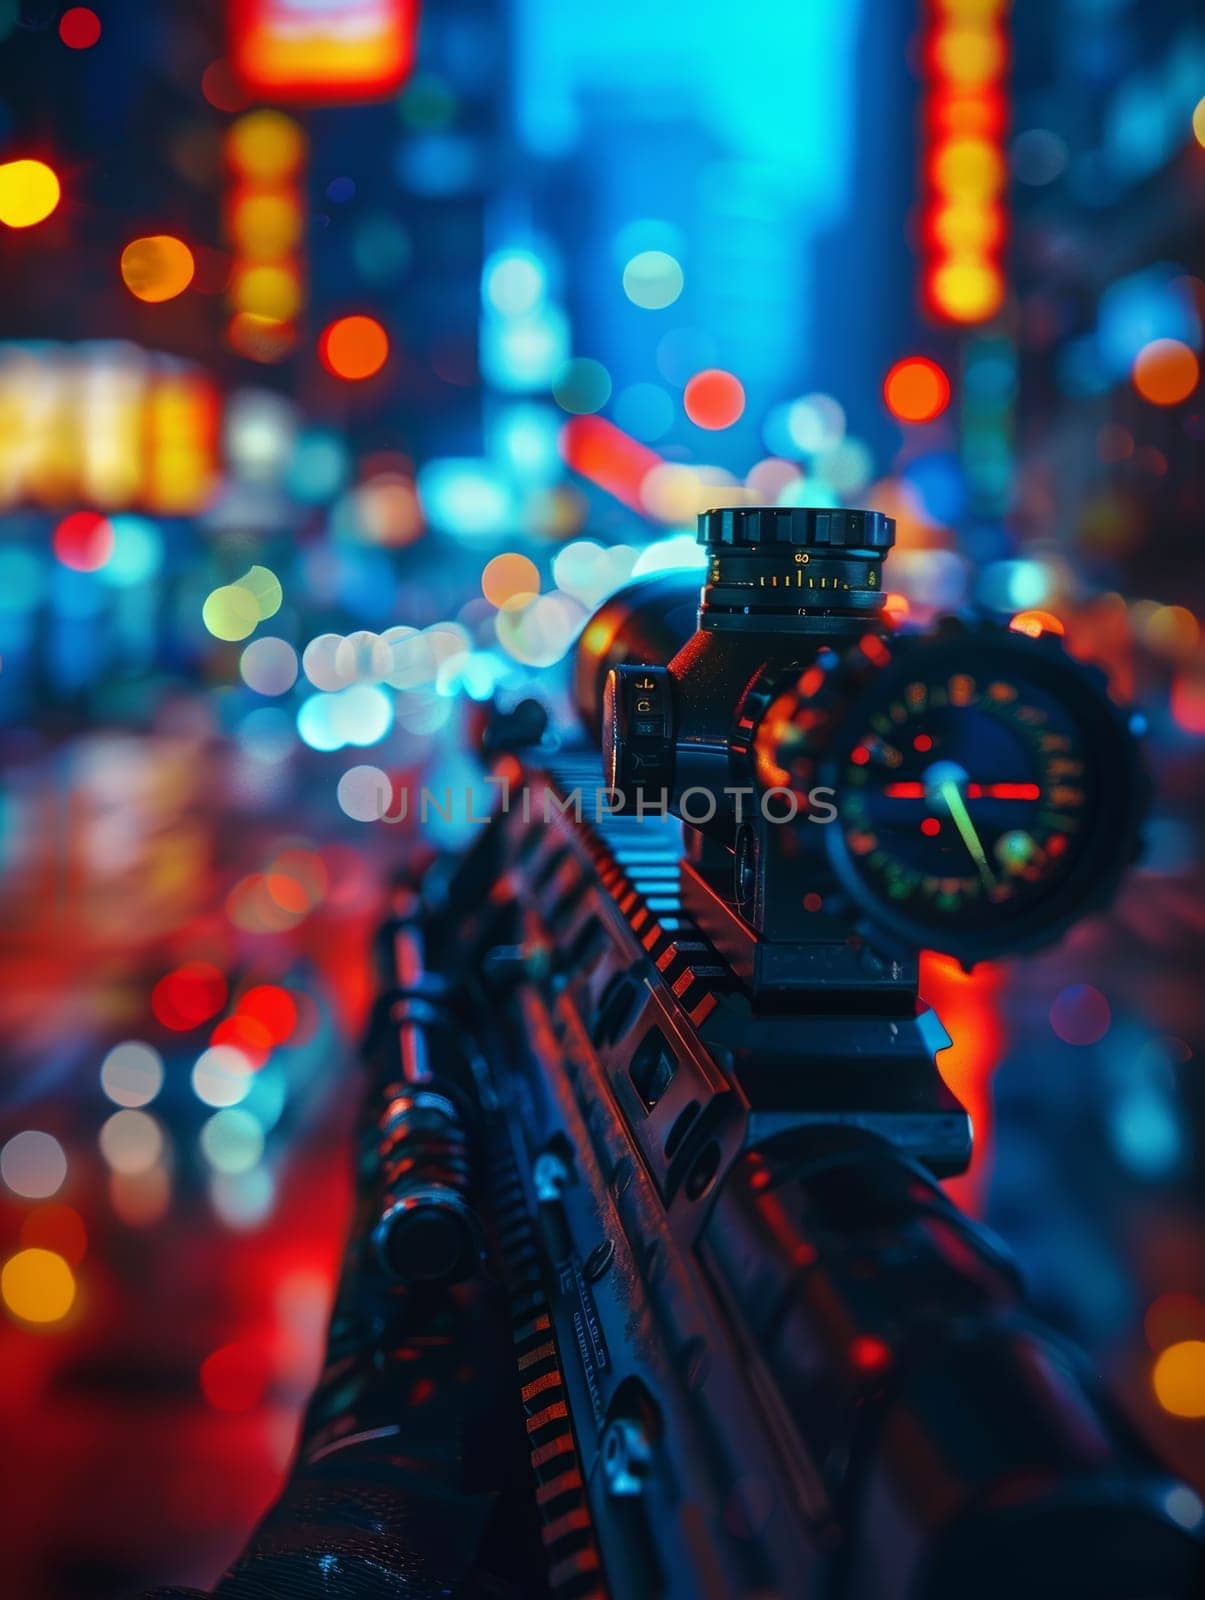 A close-up view of a tactical firearm's digital interface, encased in a striking neon-colored frame against a blurred, electrified city backdrop